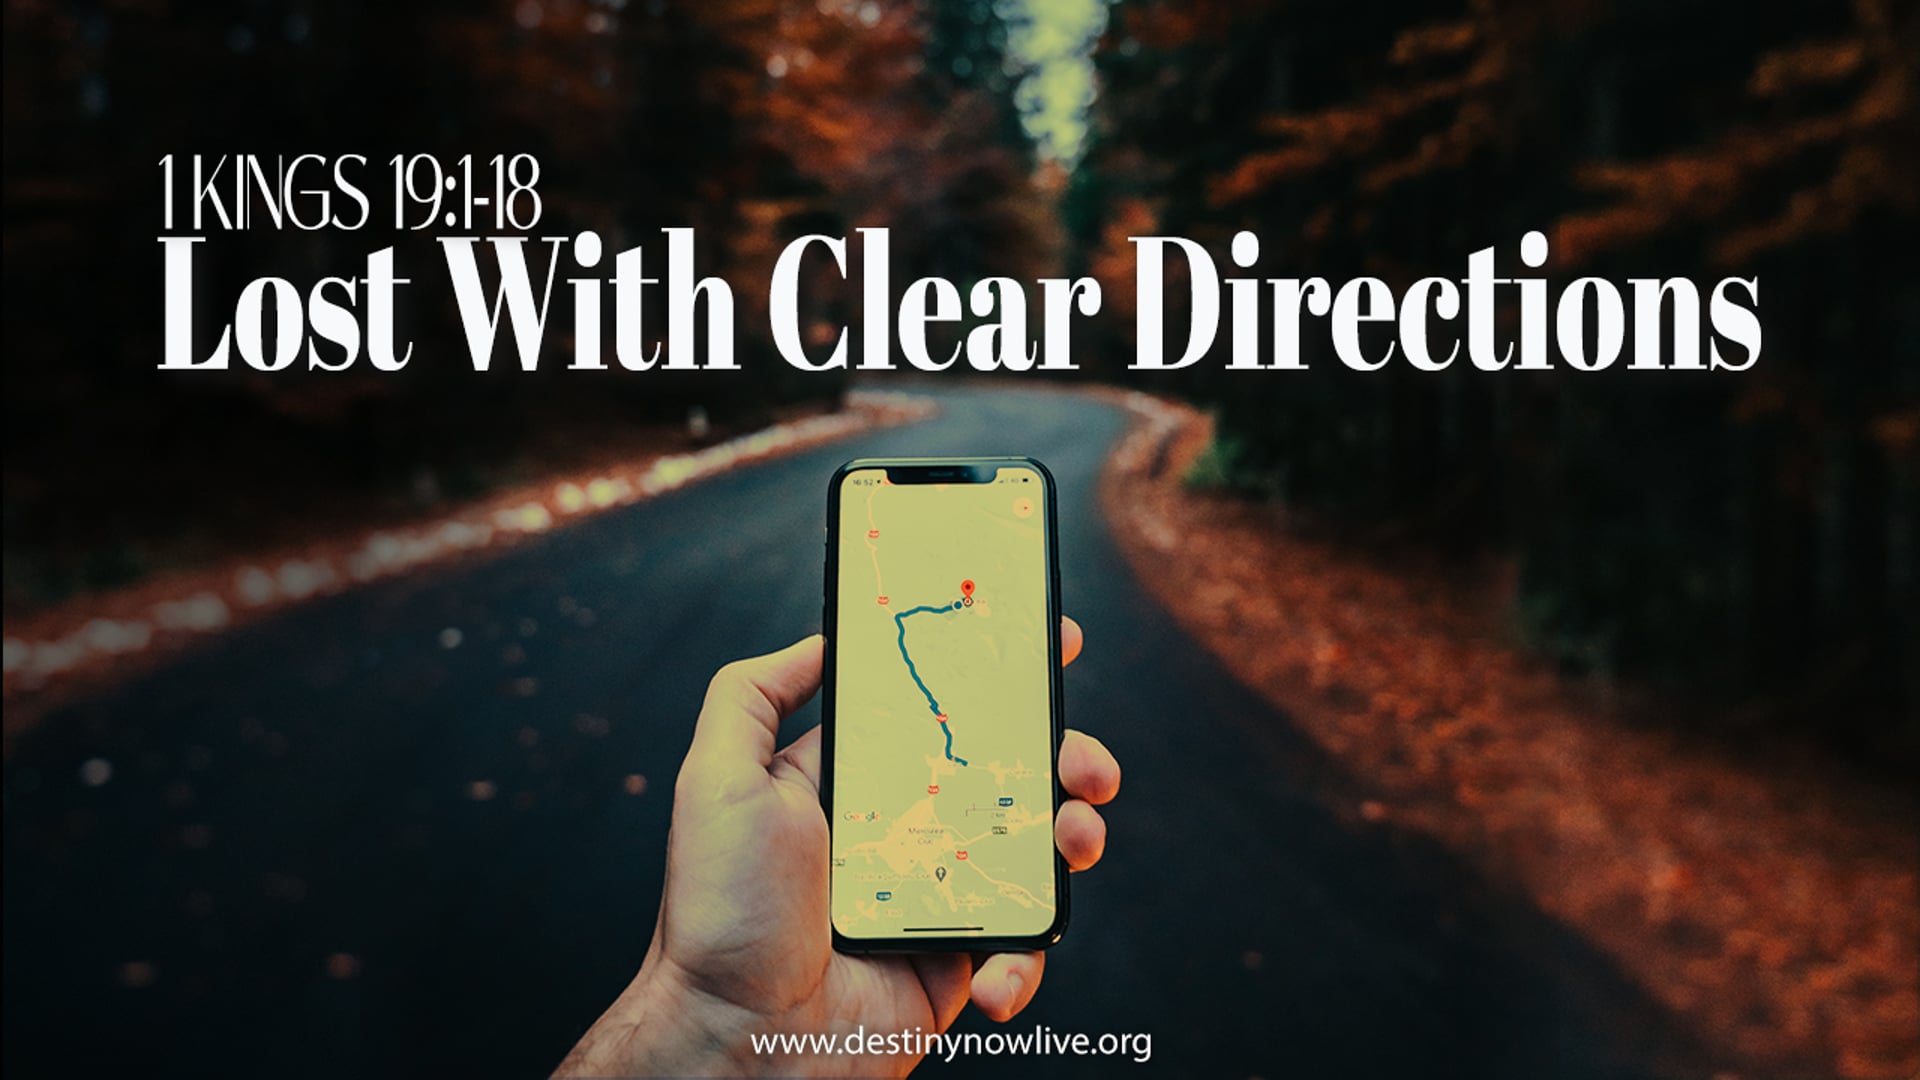 "Lost With Clear Directions" - Text to Give - 910-460-3377 - Give Online @ www.destinynow.org